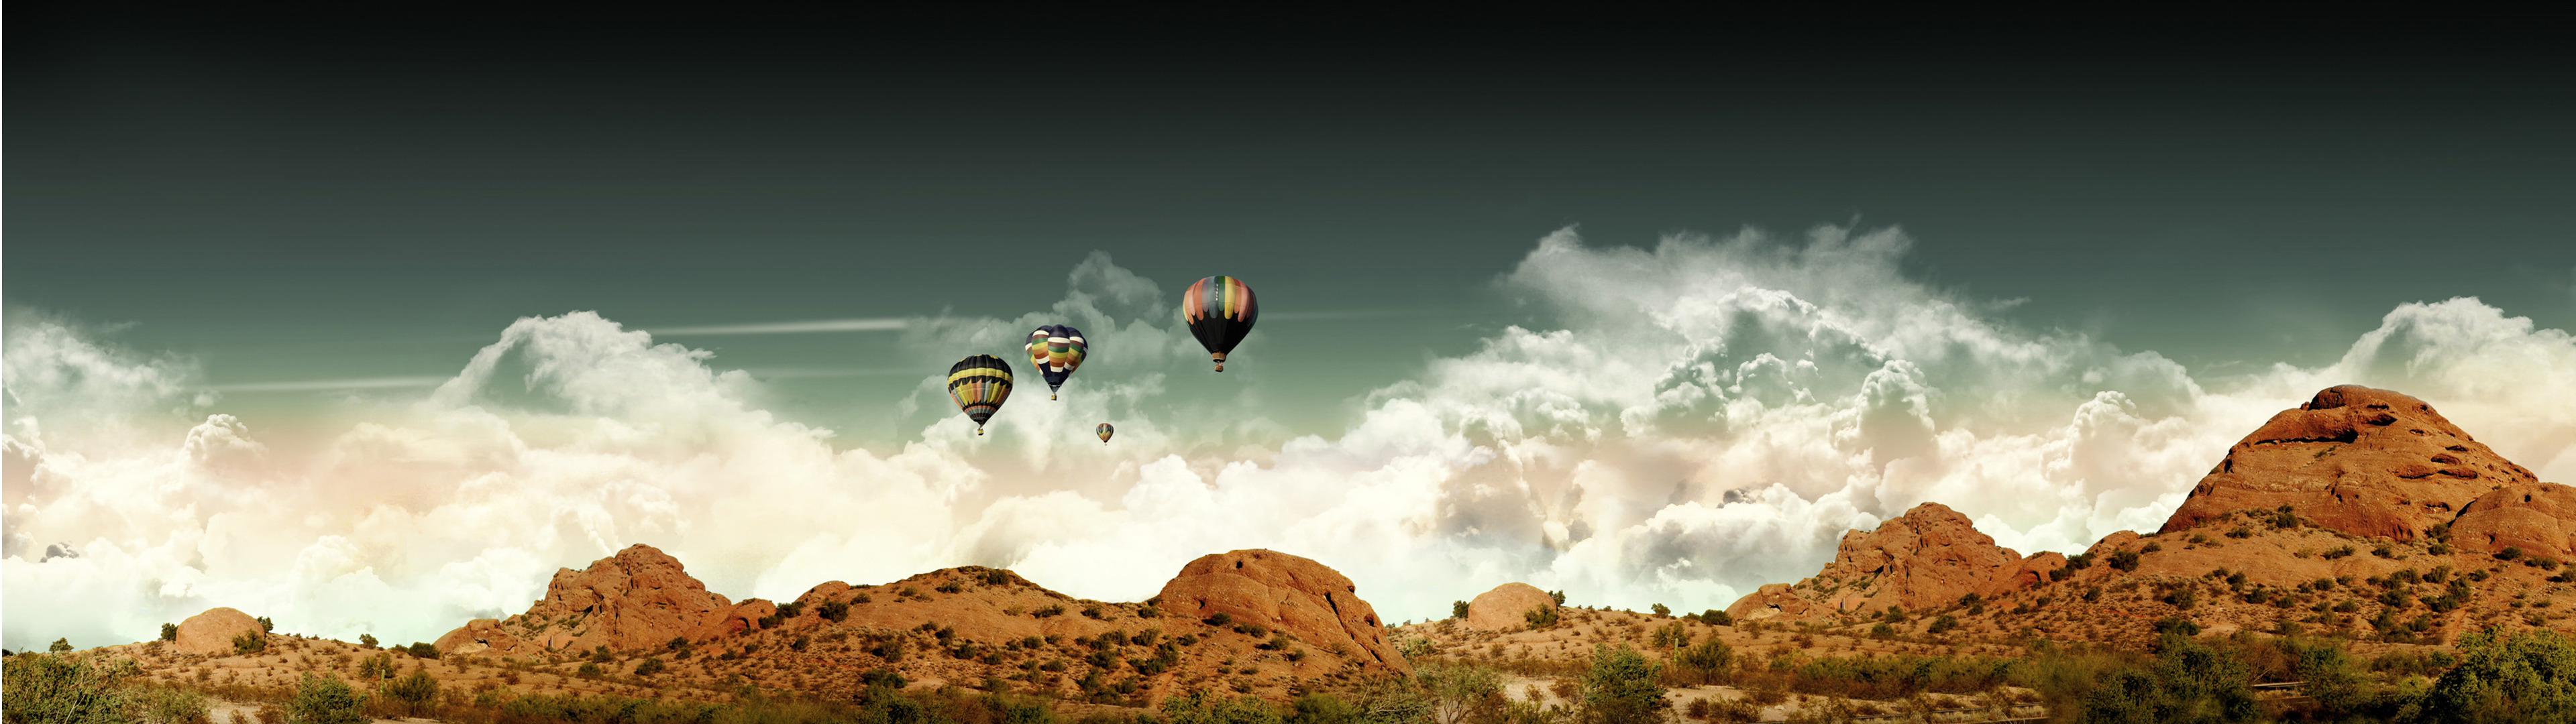 dual Monitors, Multiple Display, Hot Air Balloons, Mountains, Clouds, Desert, Landscape Wallpaper